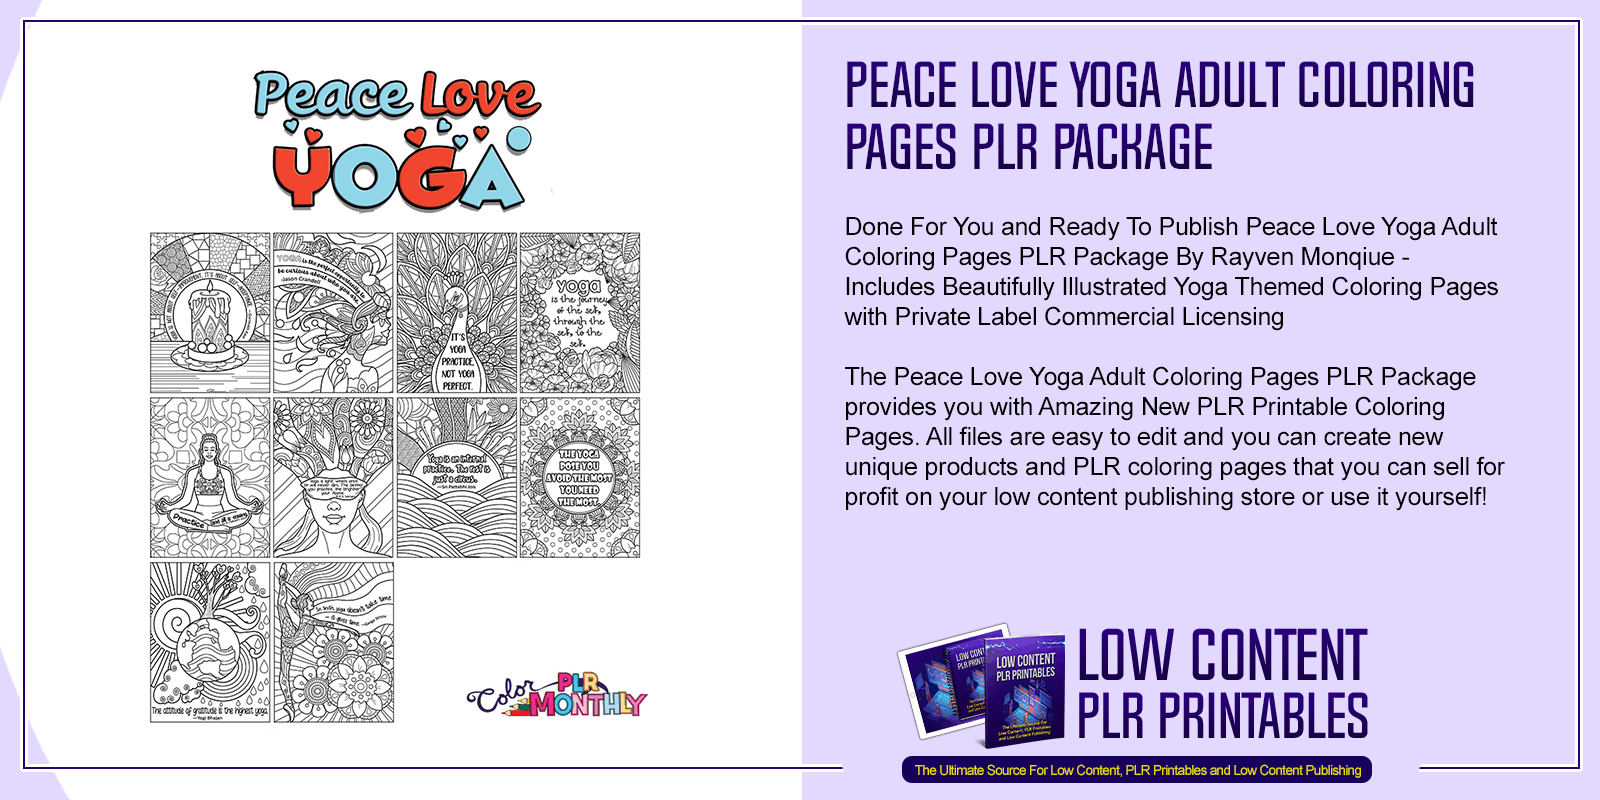 Peace Love Yoga Adult Coloring Pages PLR Package